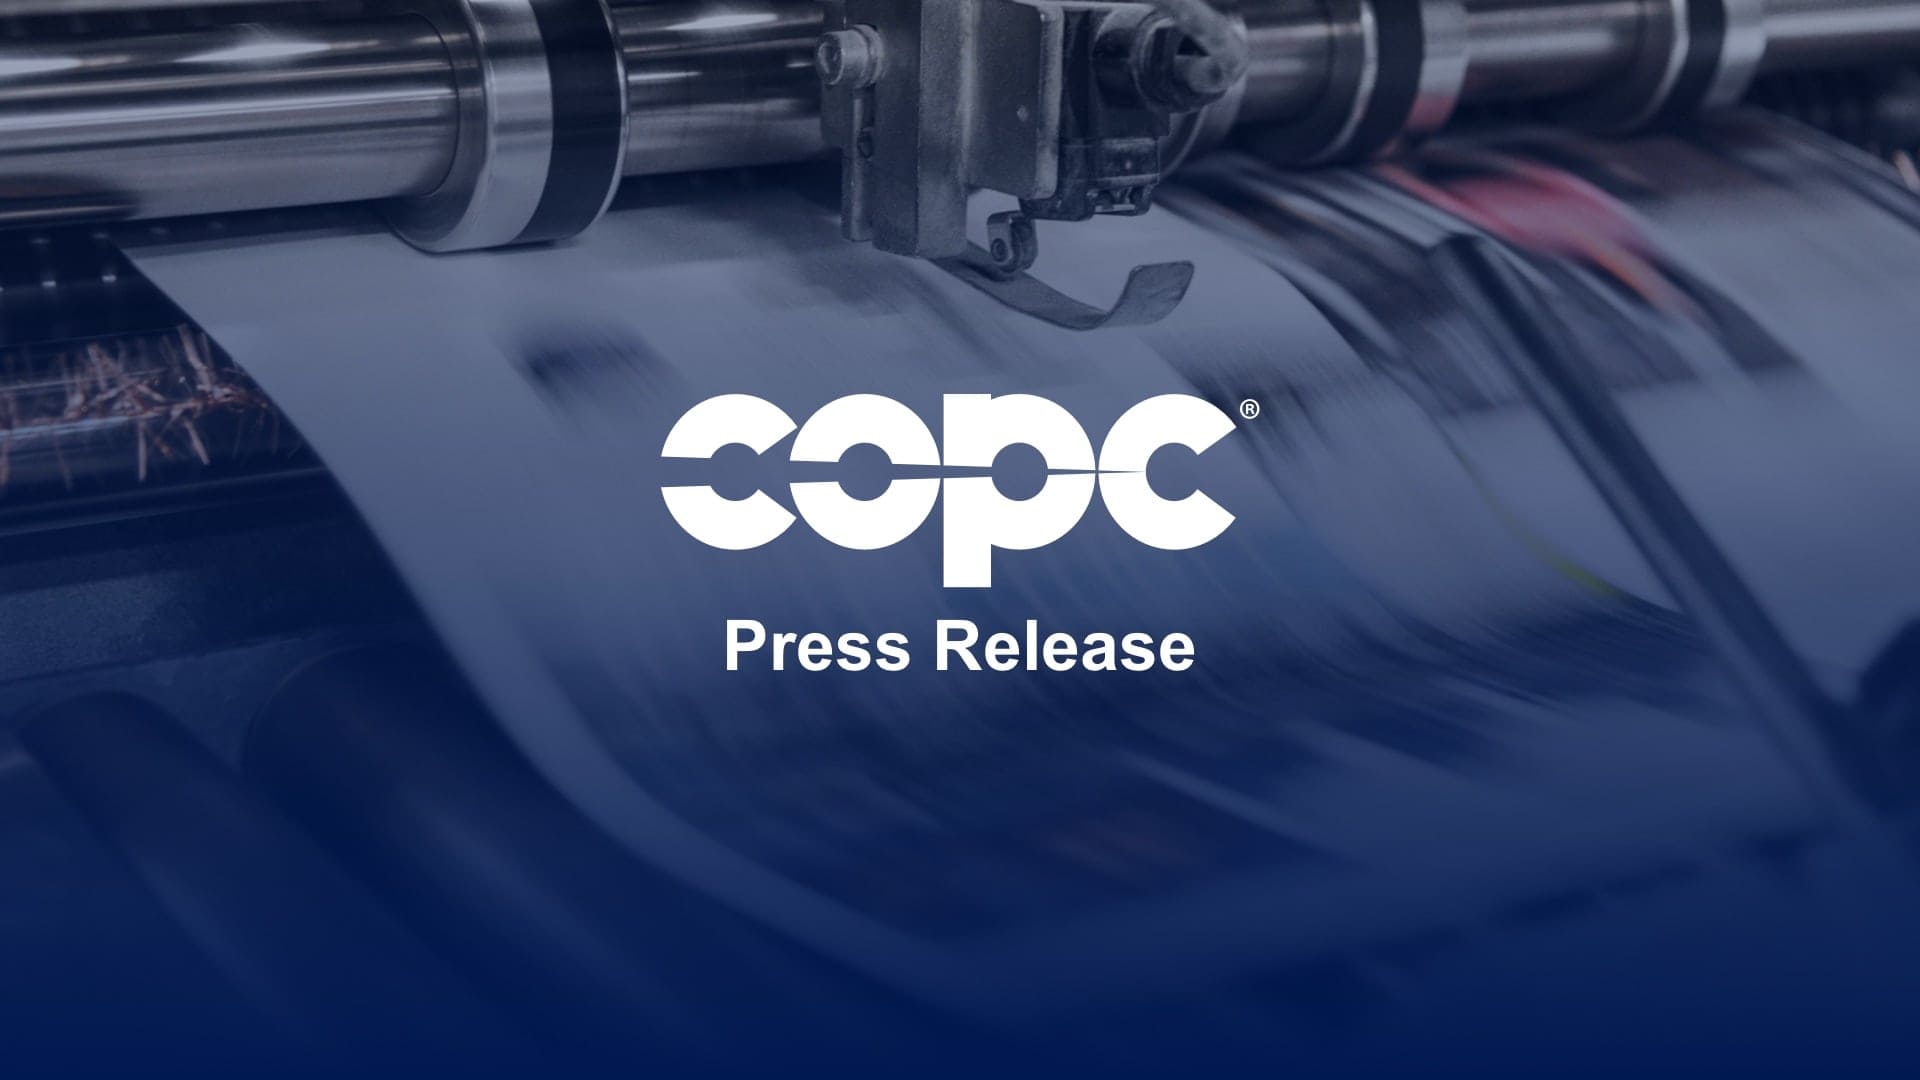 Saudi Arabia’s First COPC Inc. Certified BPO: ccc by stc  thumbnail Image 